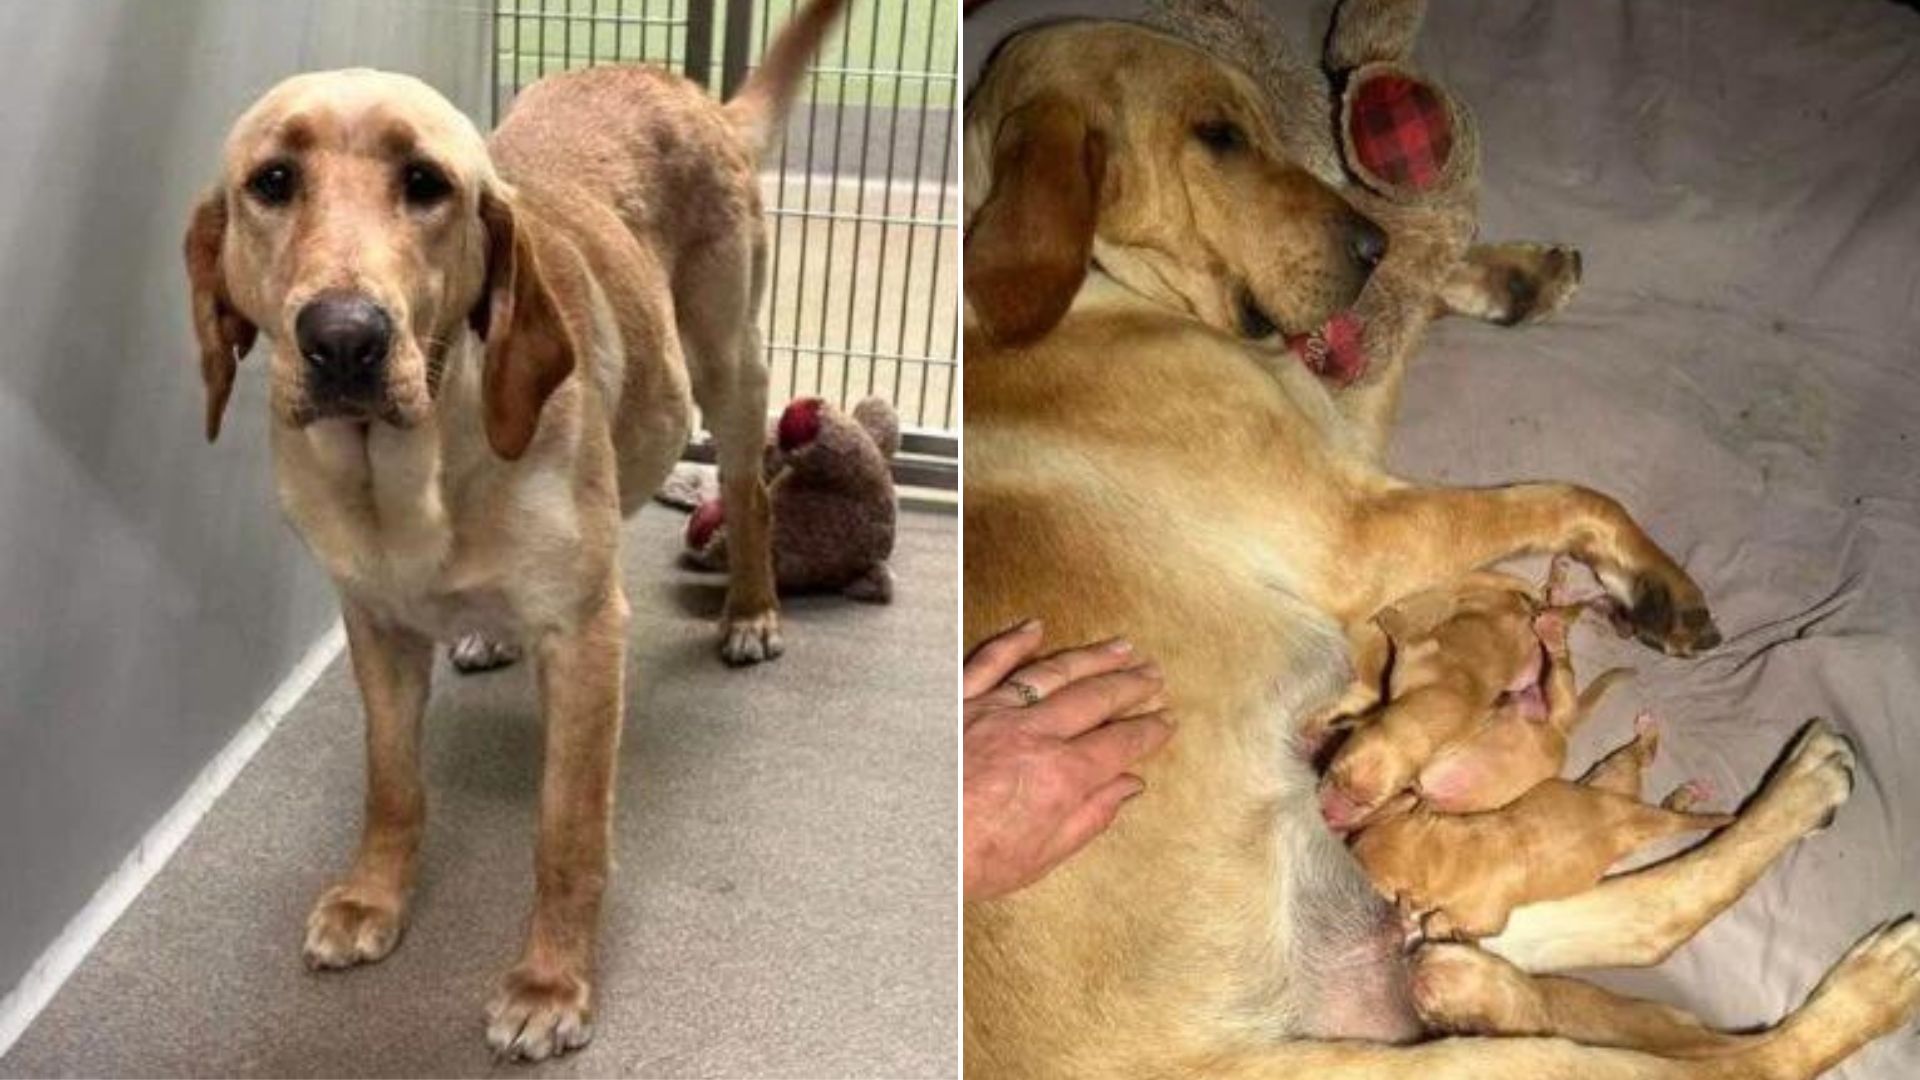 Staff Heartbroken To Find A Pregnant Pup Tied To Their Shelter Hugging Her Beloved Teddy Bear